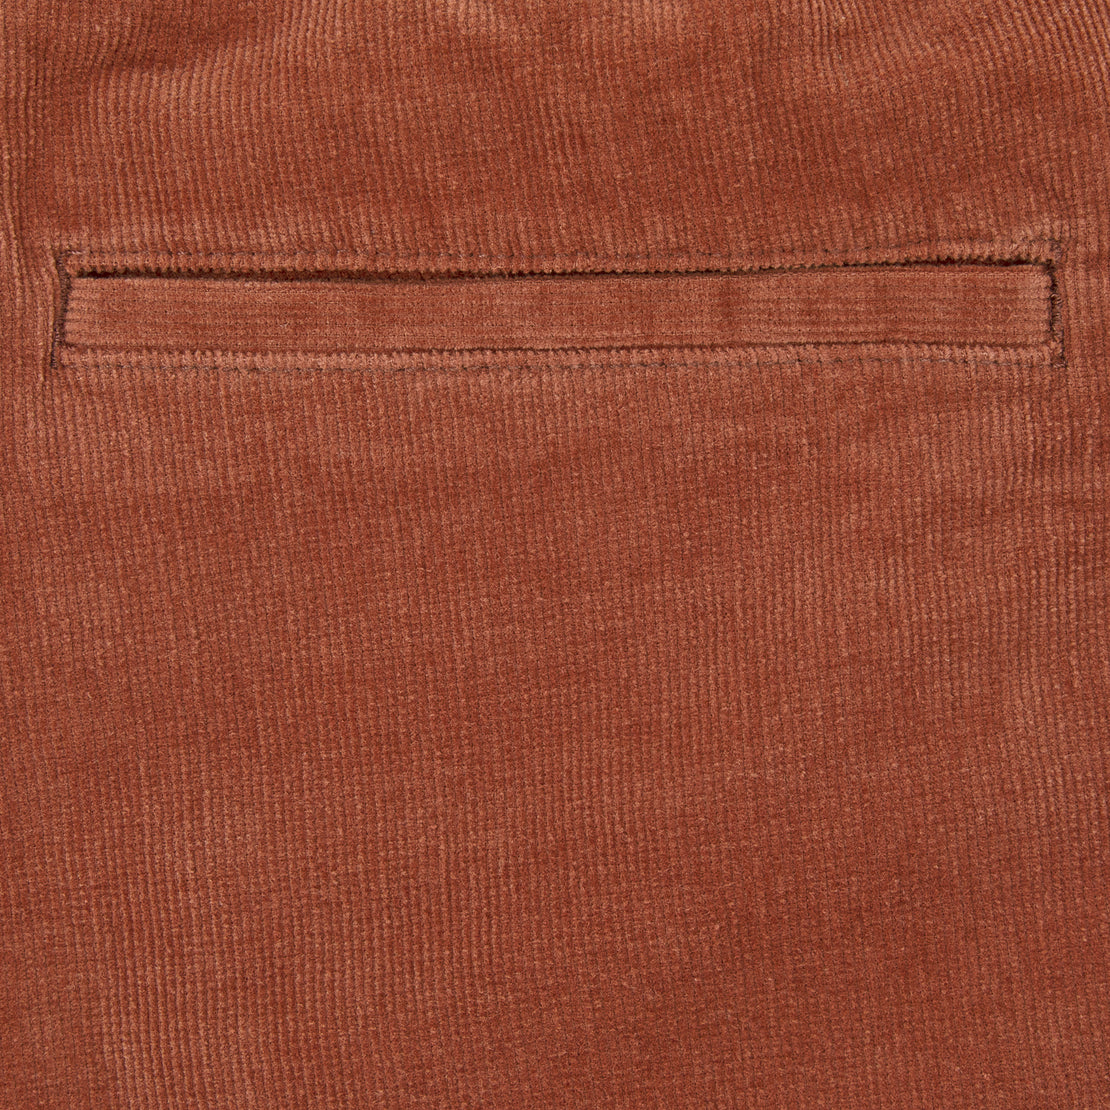 Cord Local Short - Rust - Katin - STAG Provisions - Shorts - Lounge